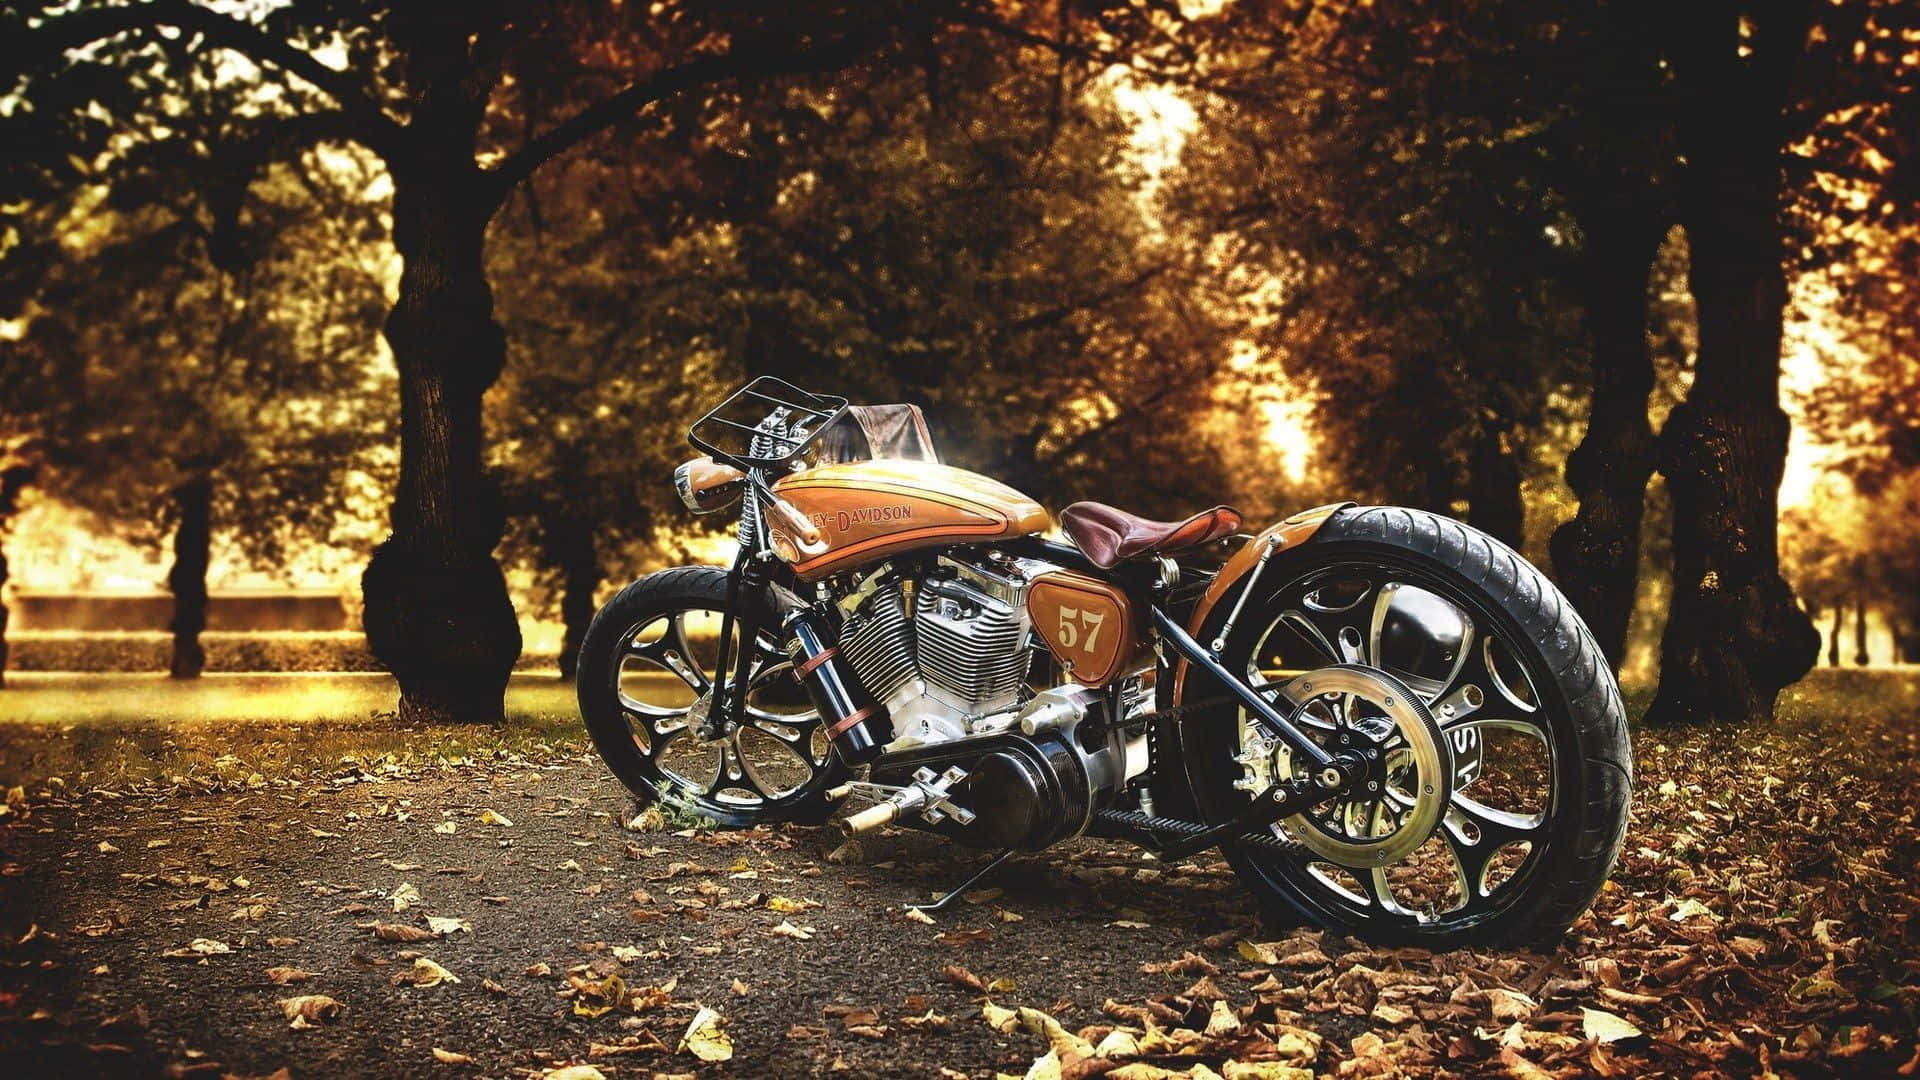 Harley Davidson Motorcycle In Forest Background